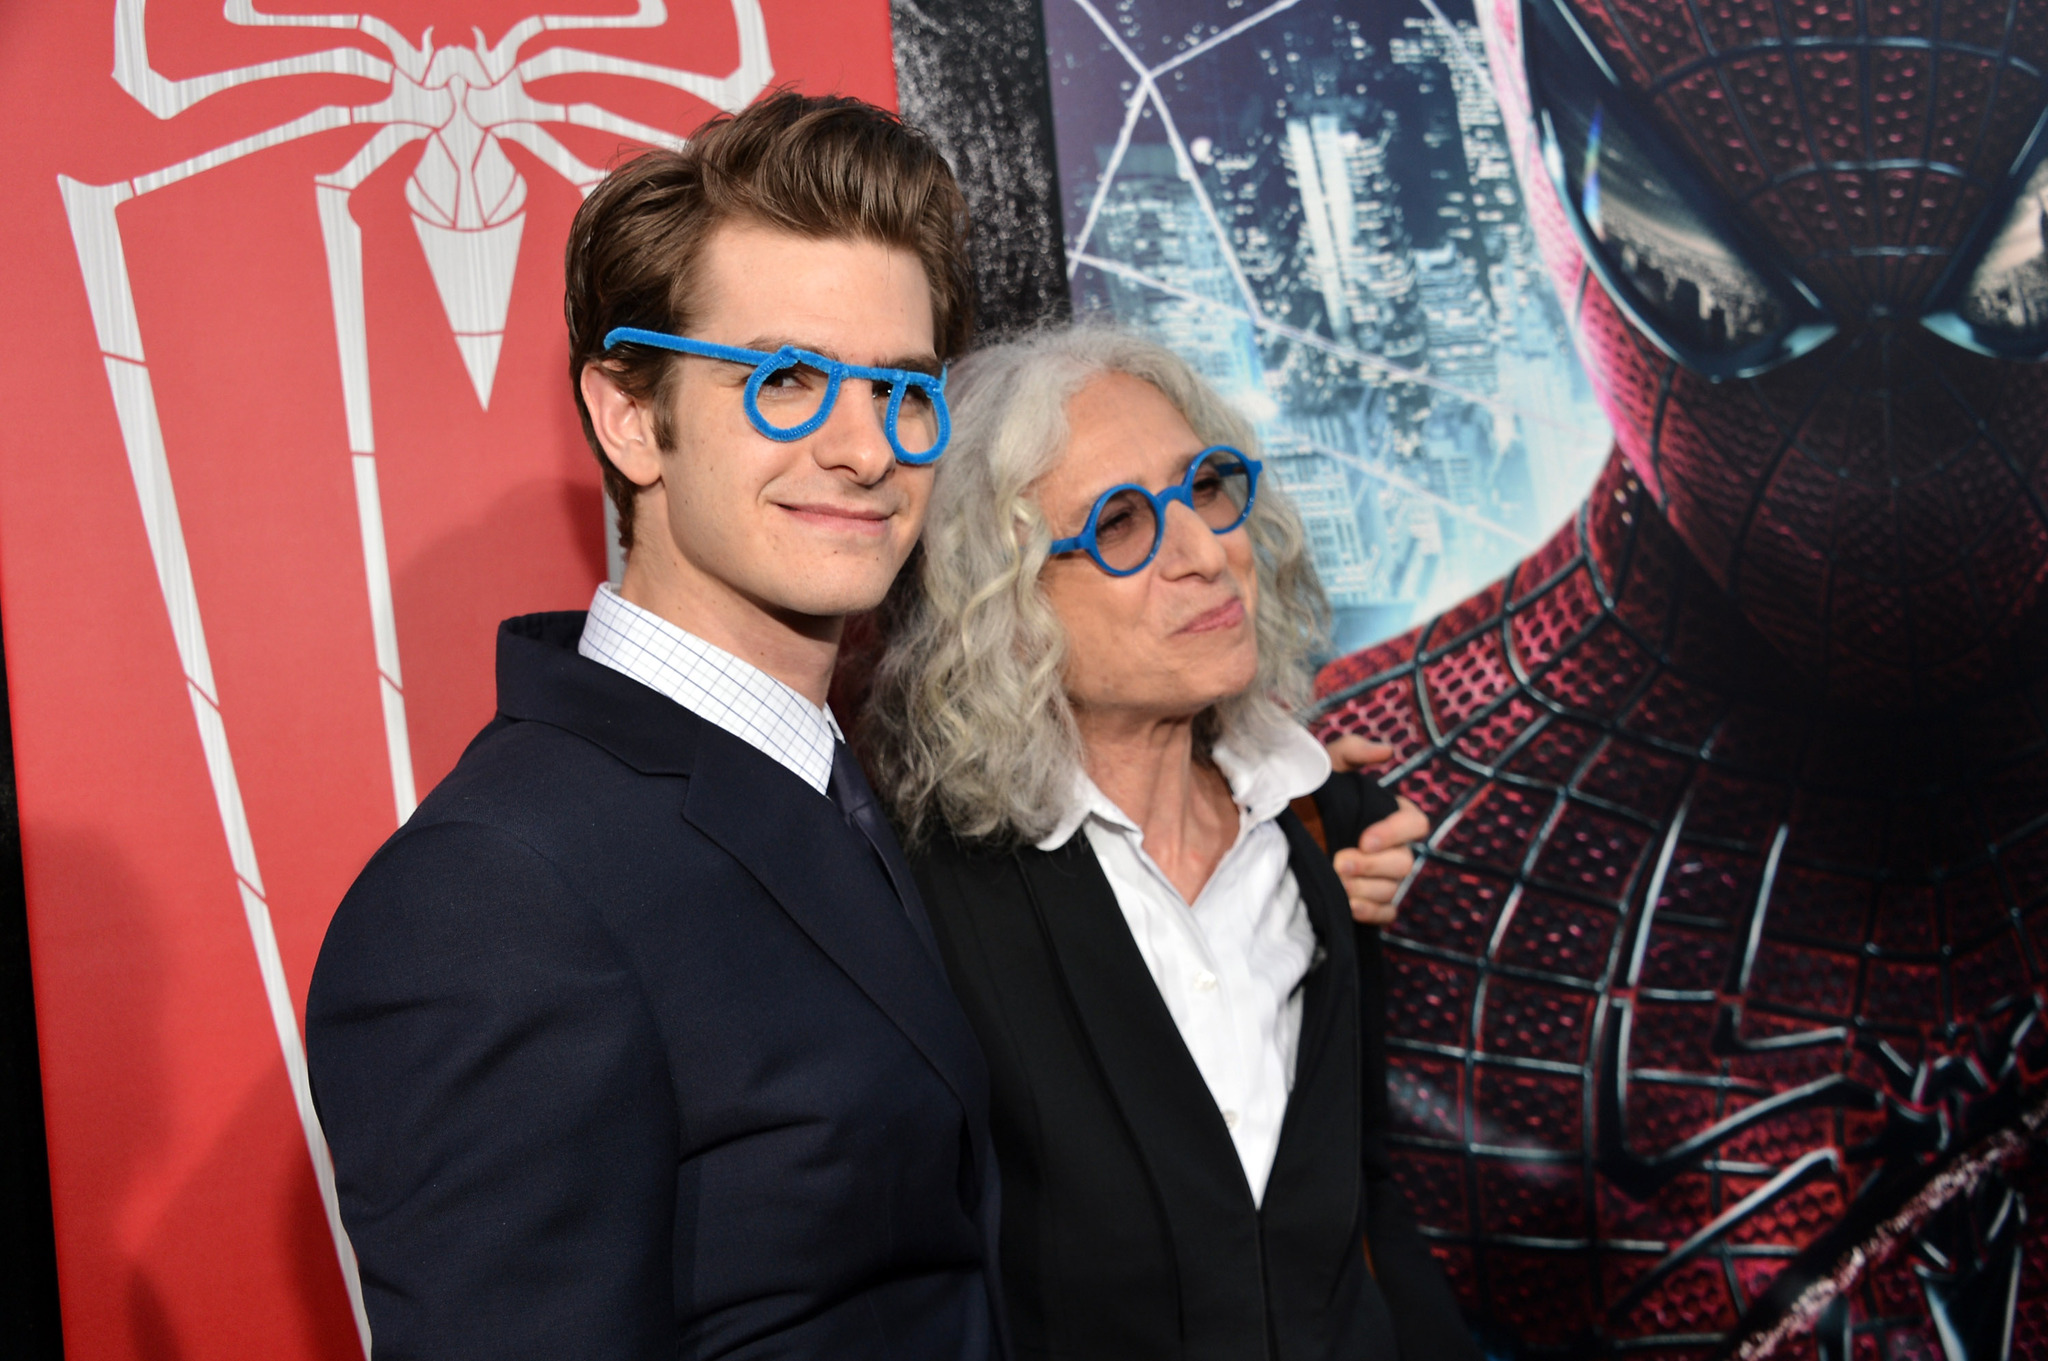 Andrew Garfield and Dr. Jane Aronson, found of Worldwide Orphans Foundation